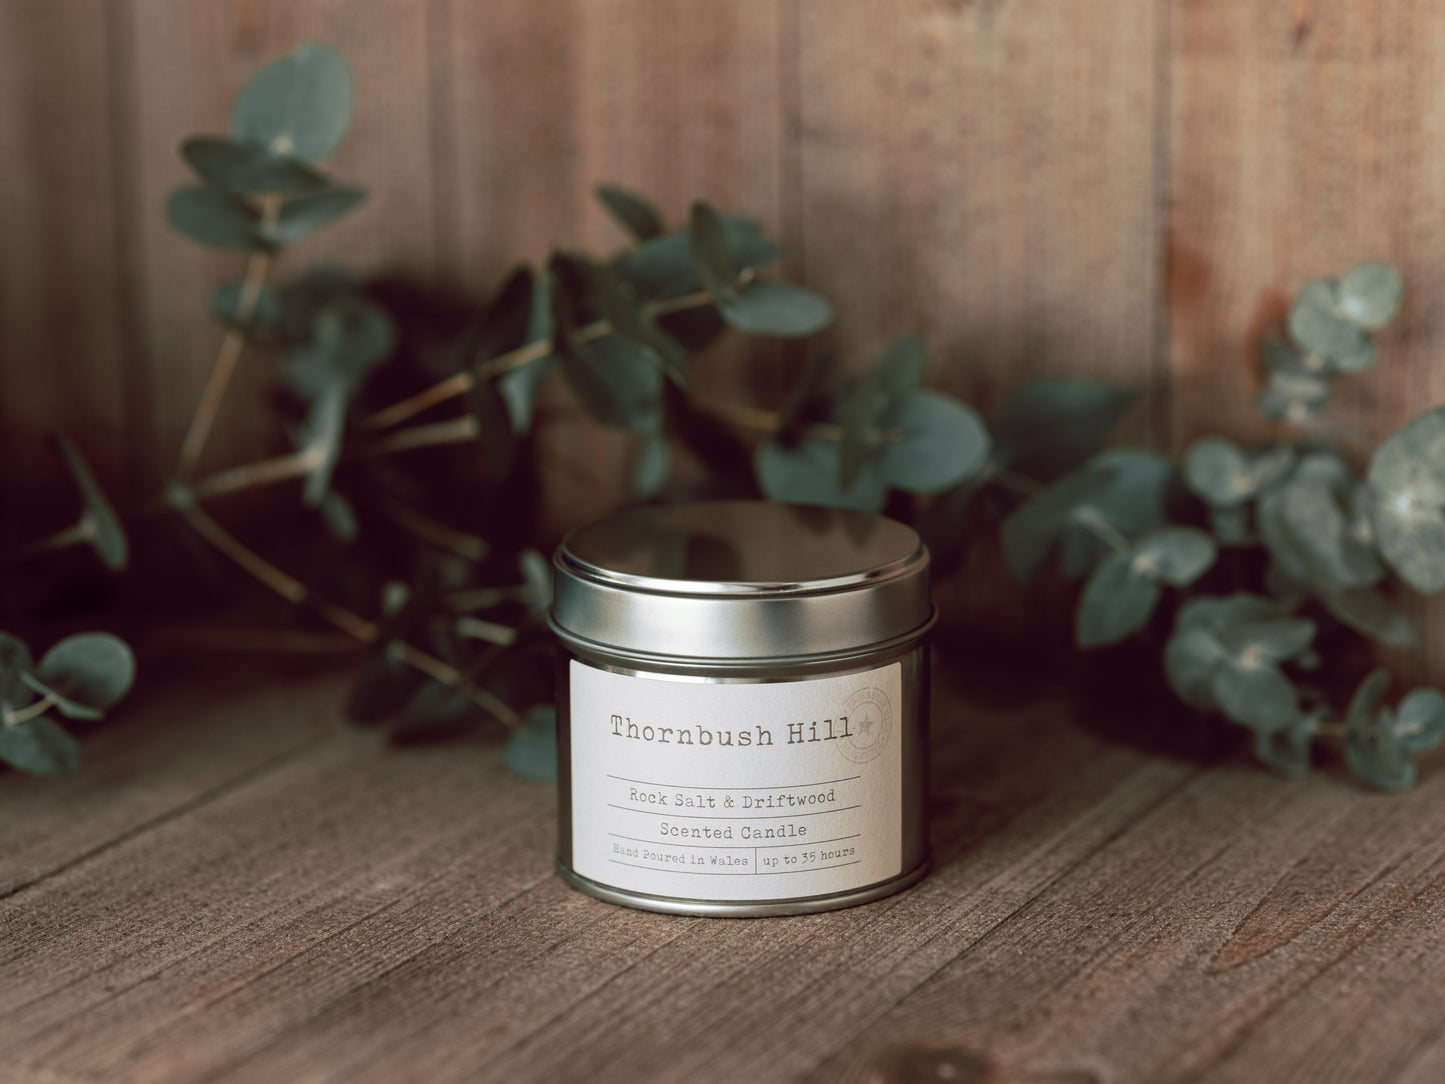 Rock Salt & Driftwood Scented Soy Tin Candle